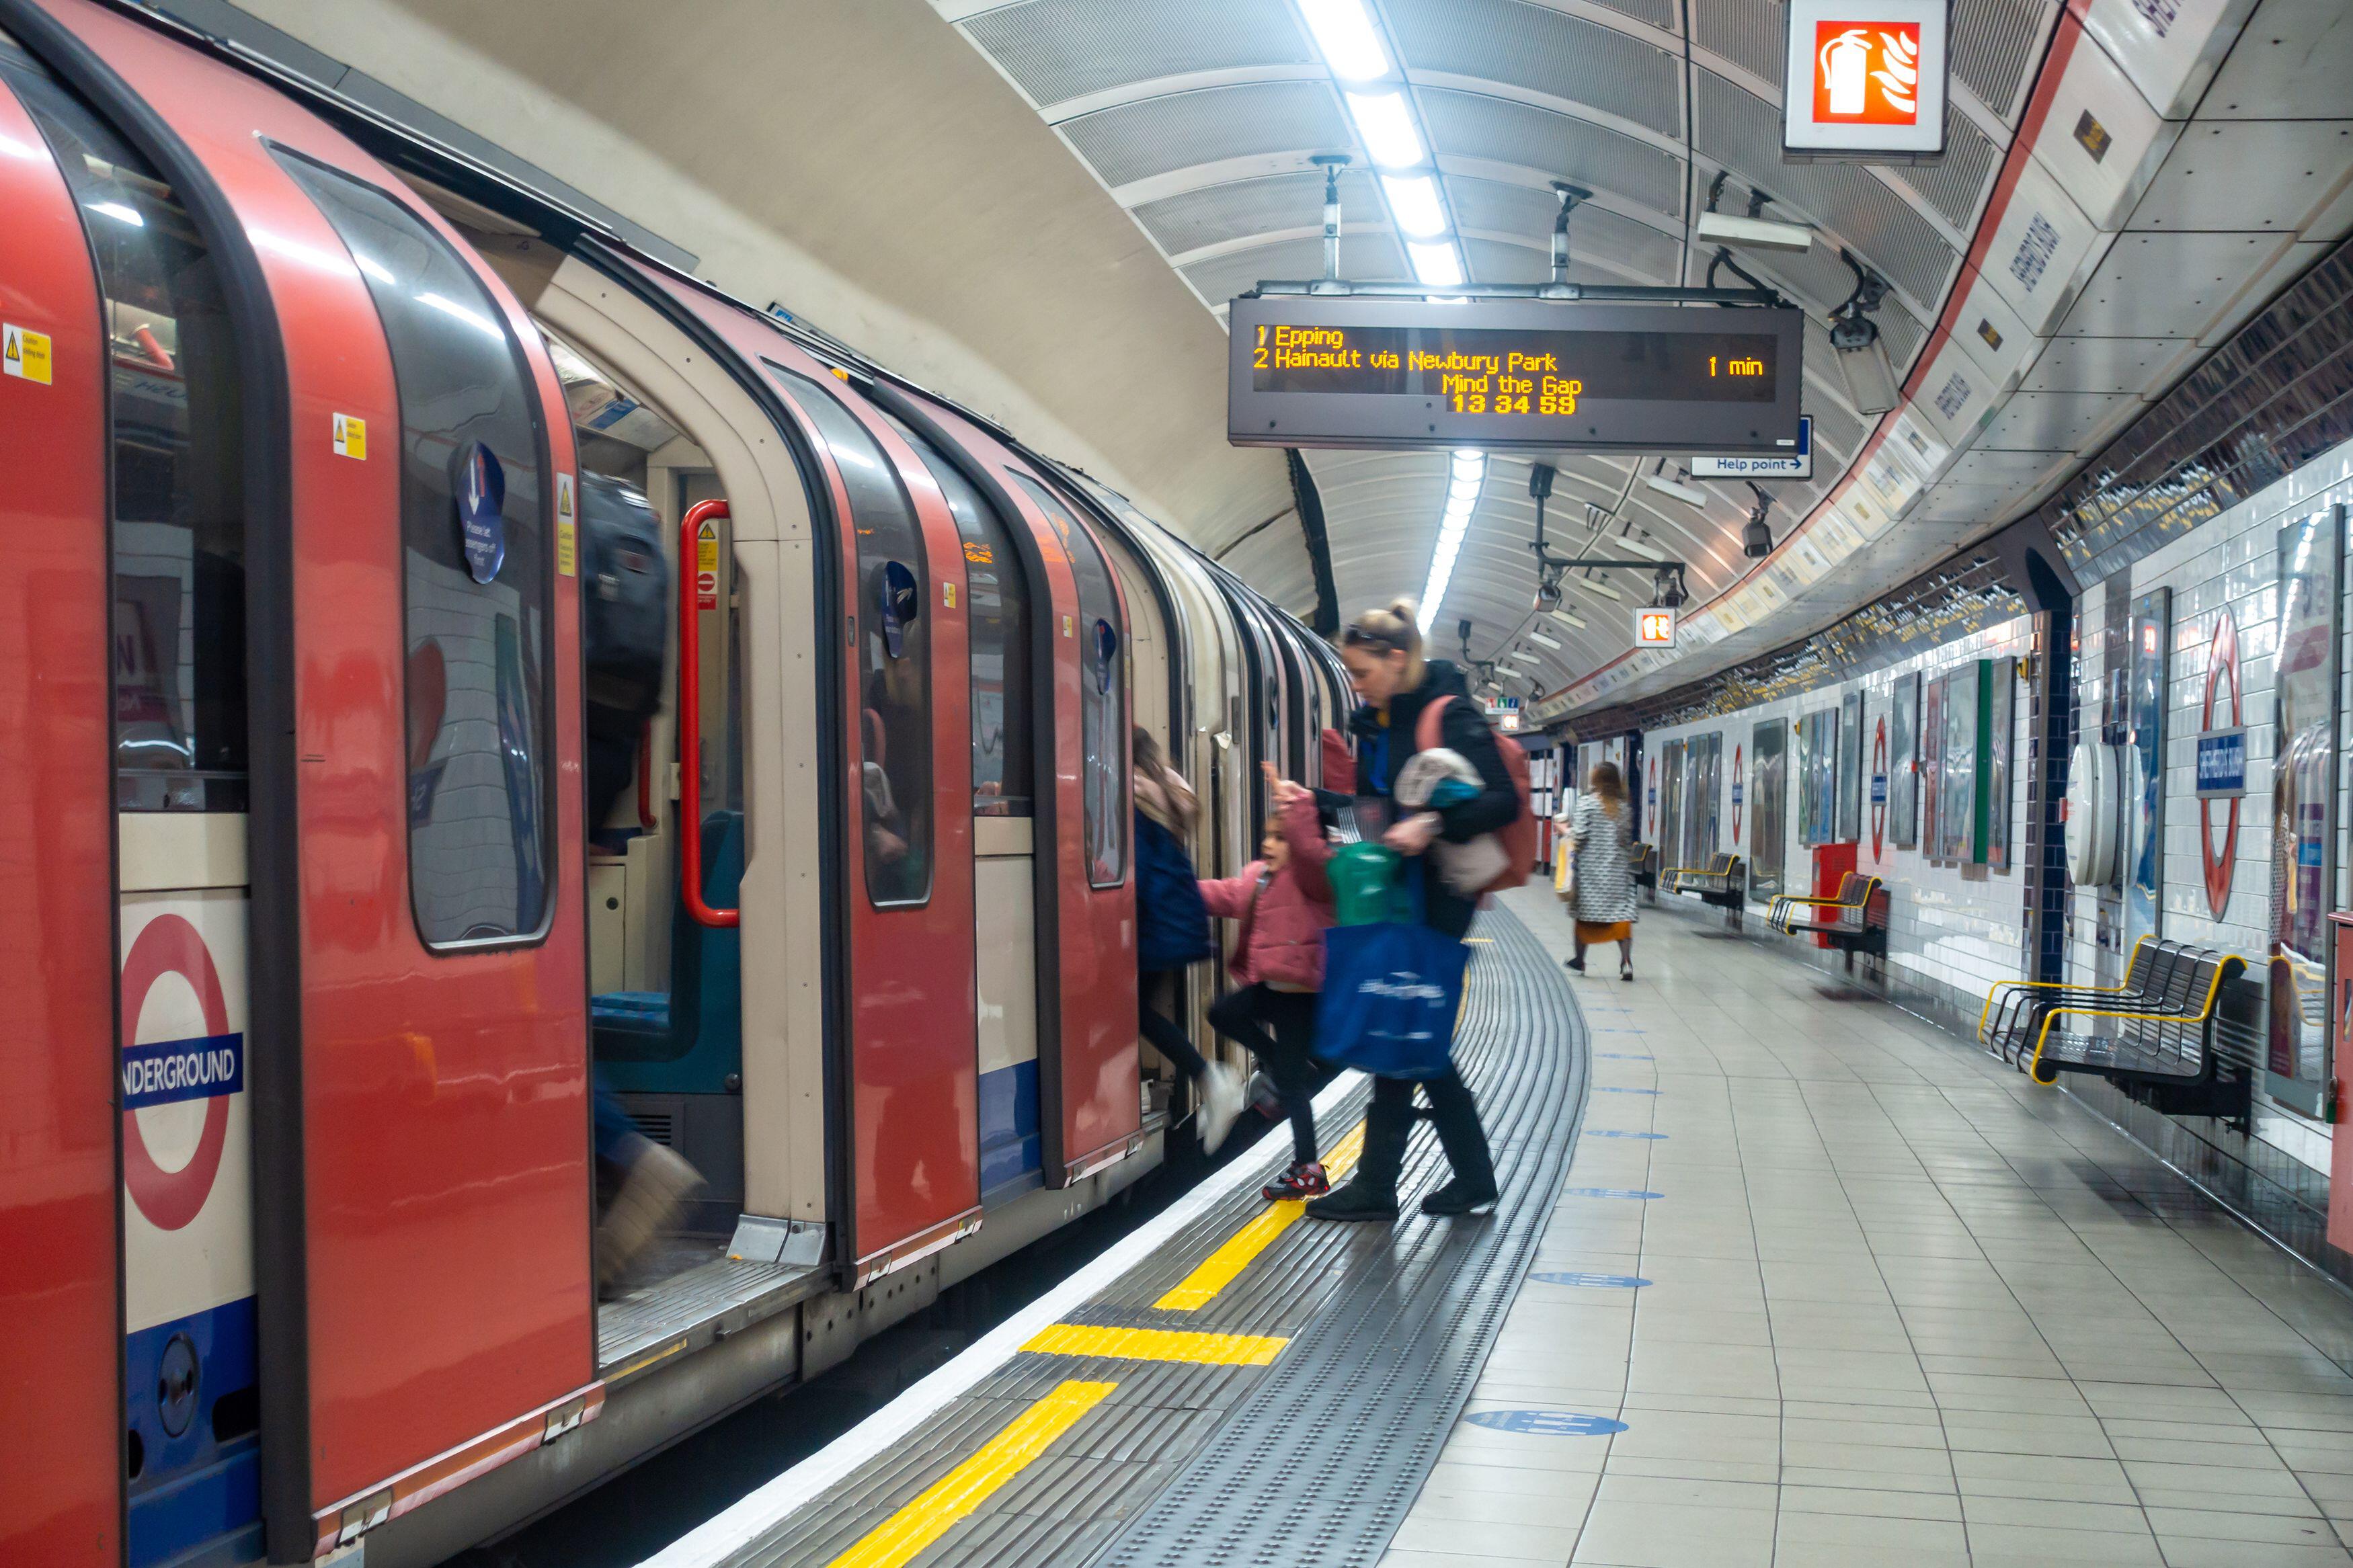 Passengers board a London Underground train at Shepherd's Bush station on the Central Line